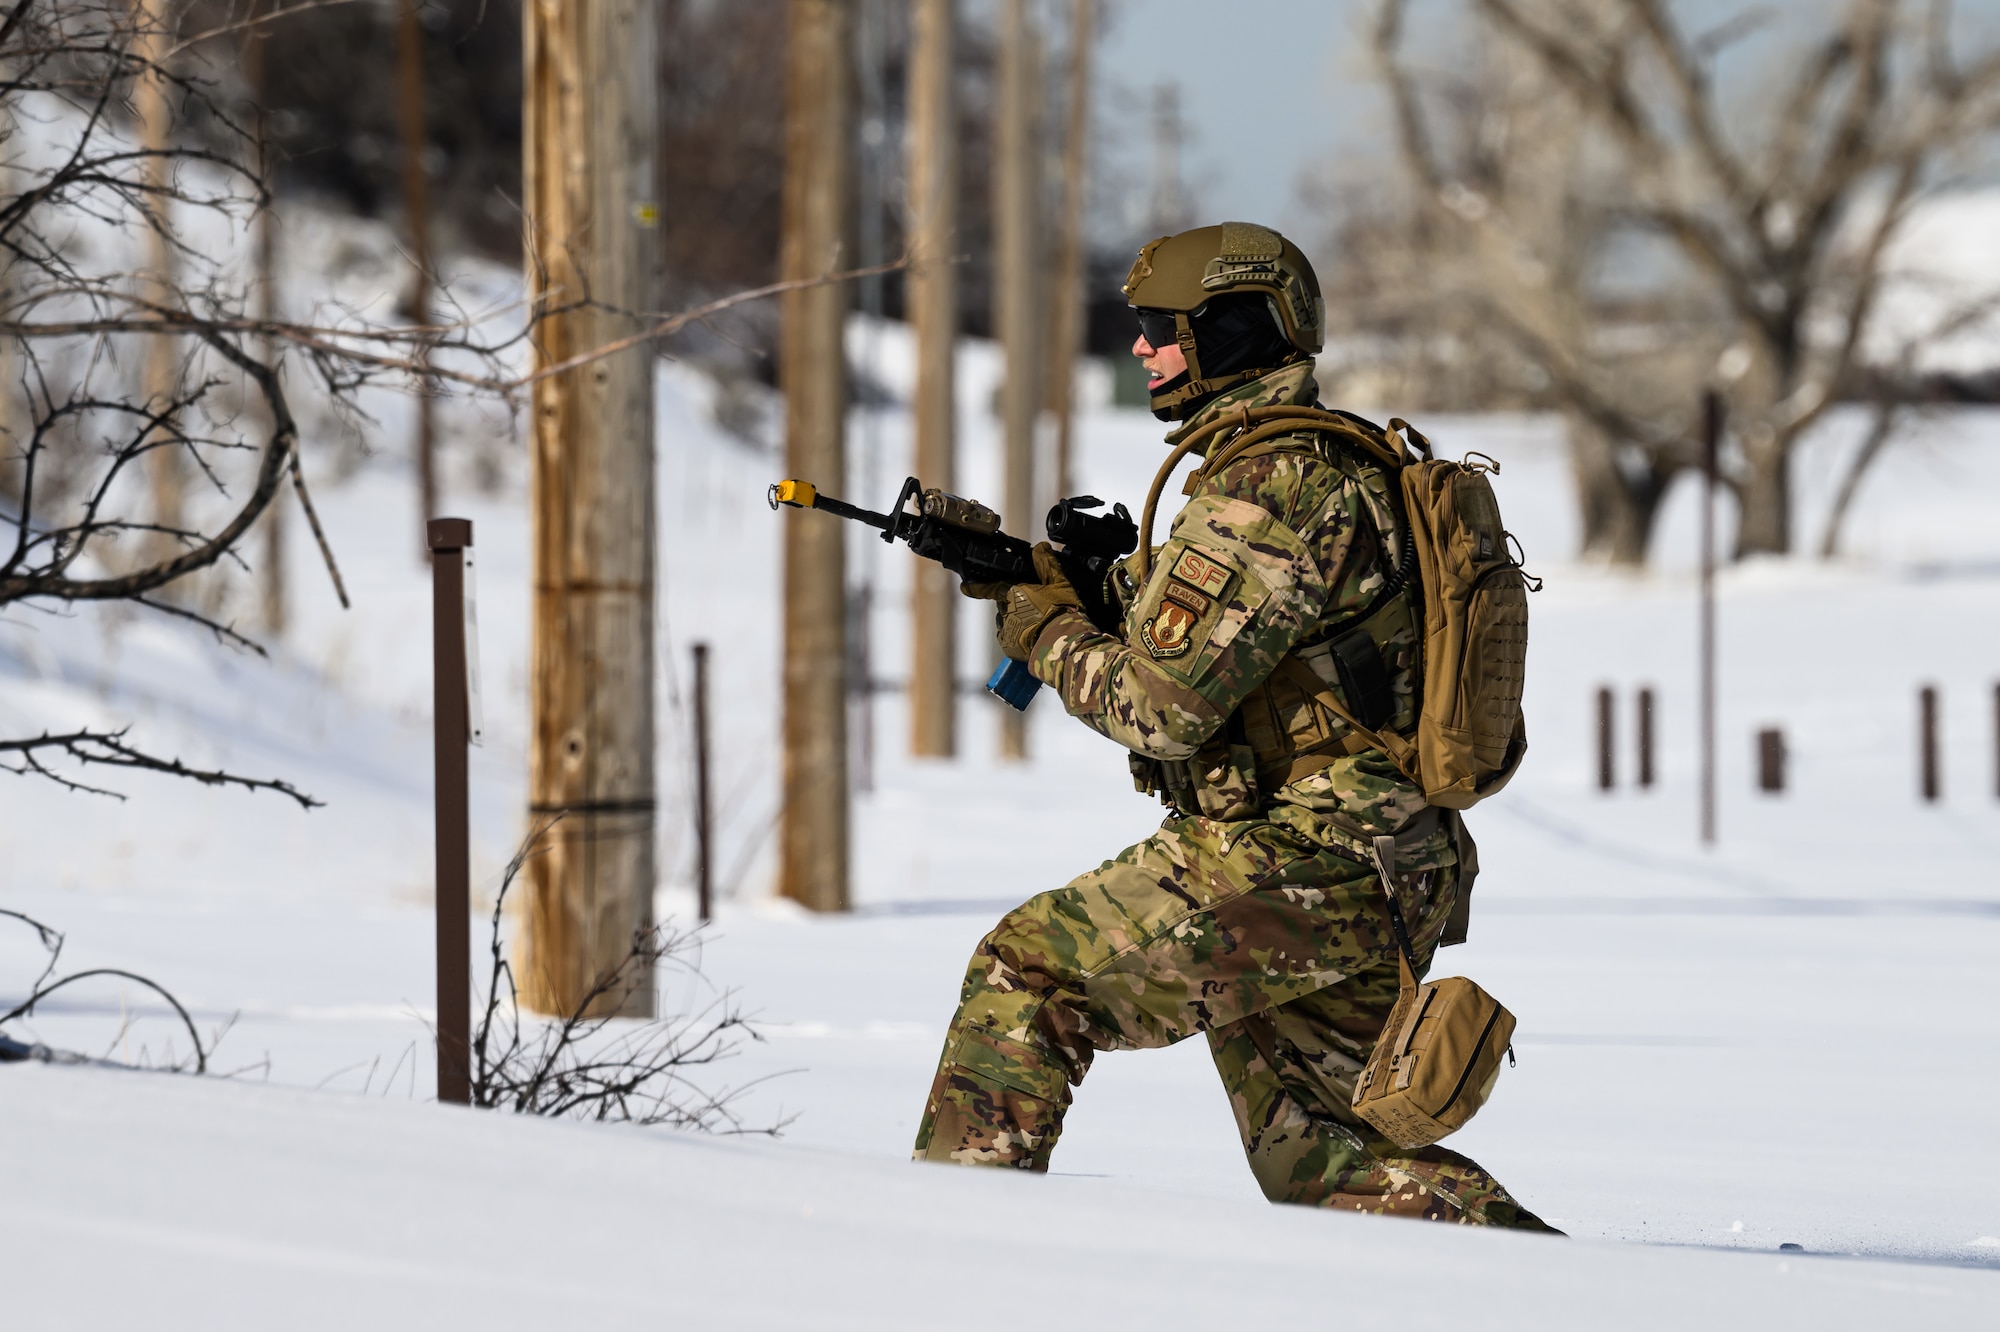 Staff Sgt. Timothy Bukovich, 75th Security Forces Squadron, searches for opposing forces during a training exercise at Hill Air Force Base, Utah, March 28, 2023. The squadron conducted a series of near-peer adversary field training exercises in the Base Operations Readiness Area from March 18-28. (U.S. Air Force photo by R. Nial Bradshaw)